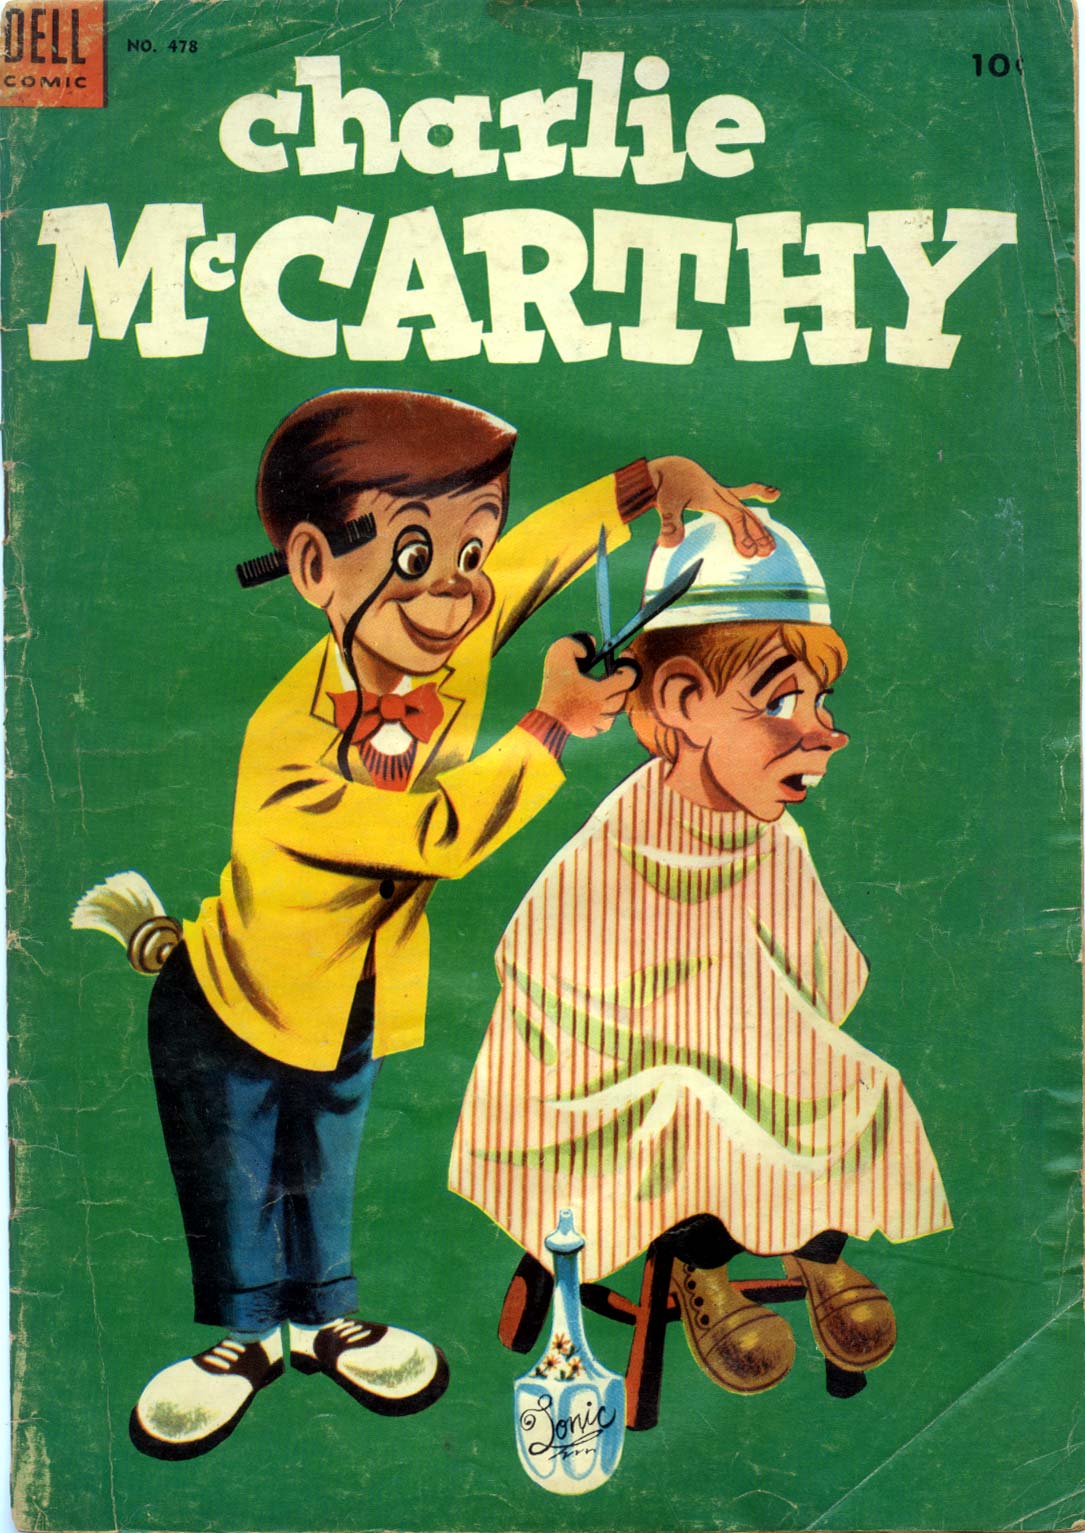 Book Cover For 0478 - Charlie McCarthy